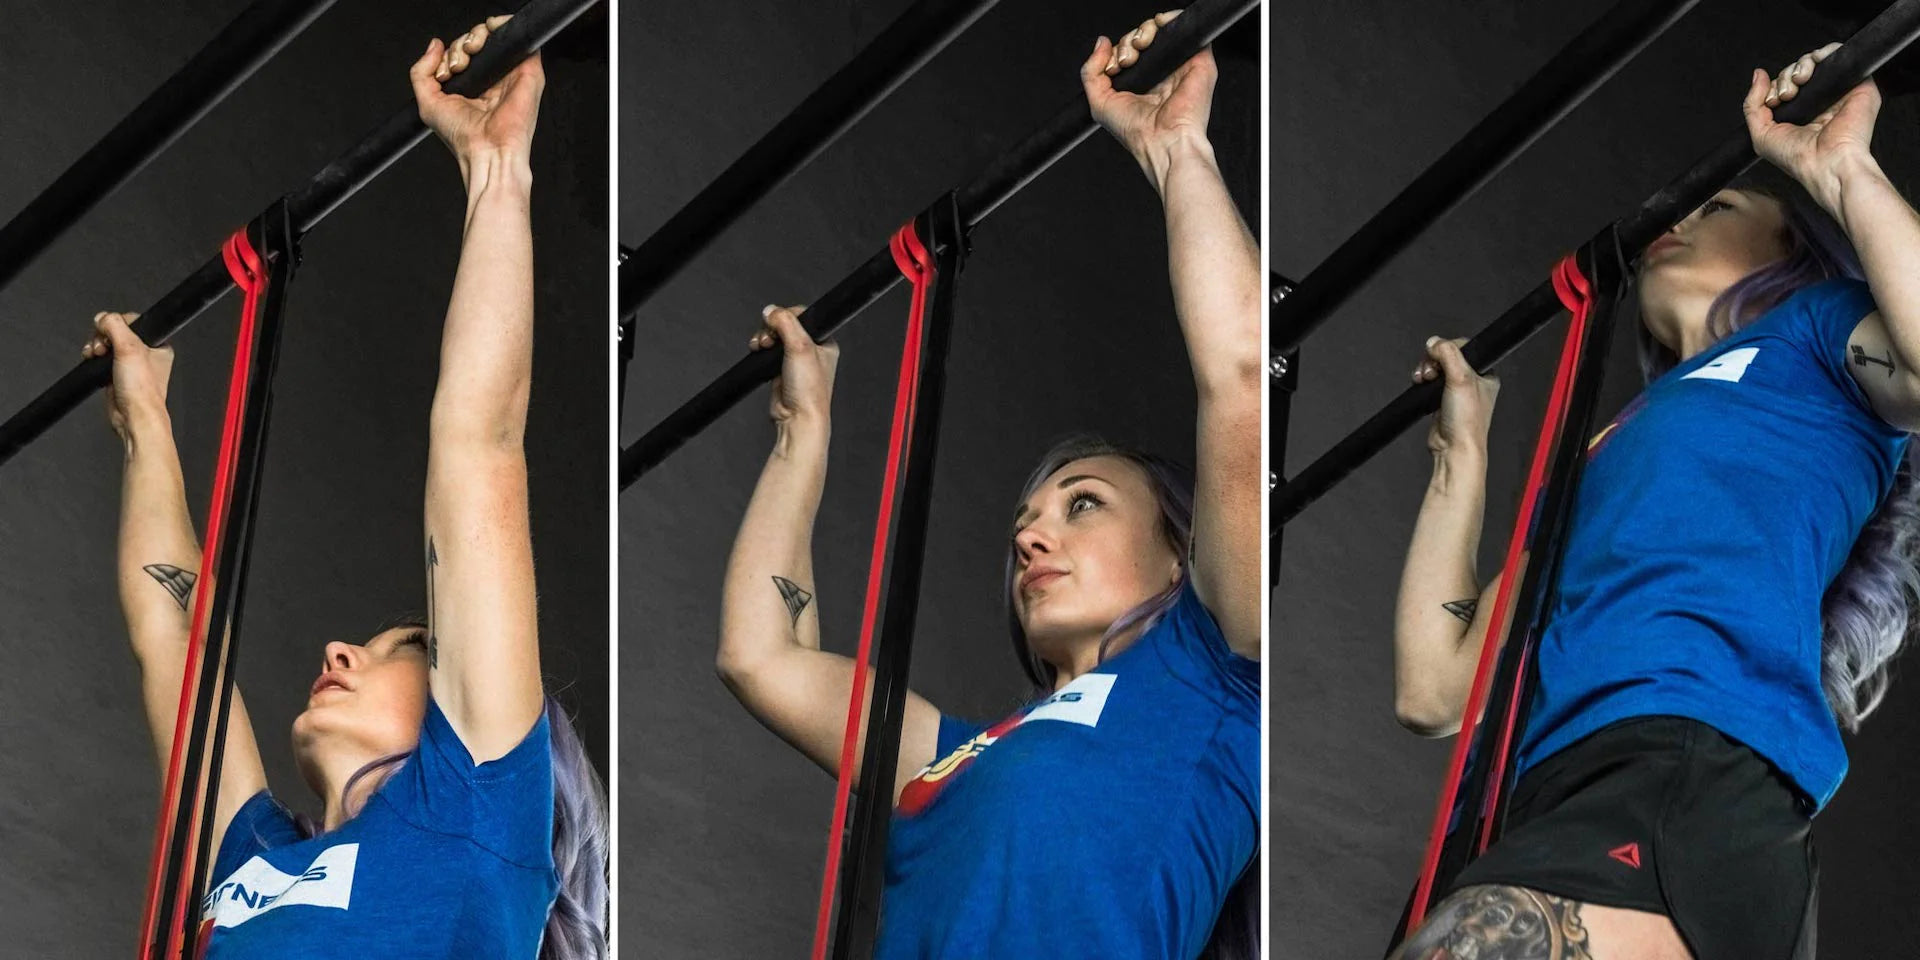 Multi-Grip Pull-Up Bar, REP Fitness